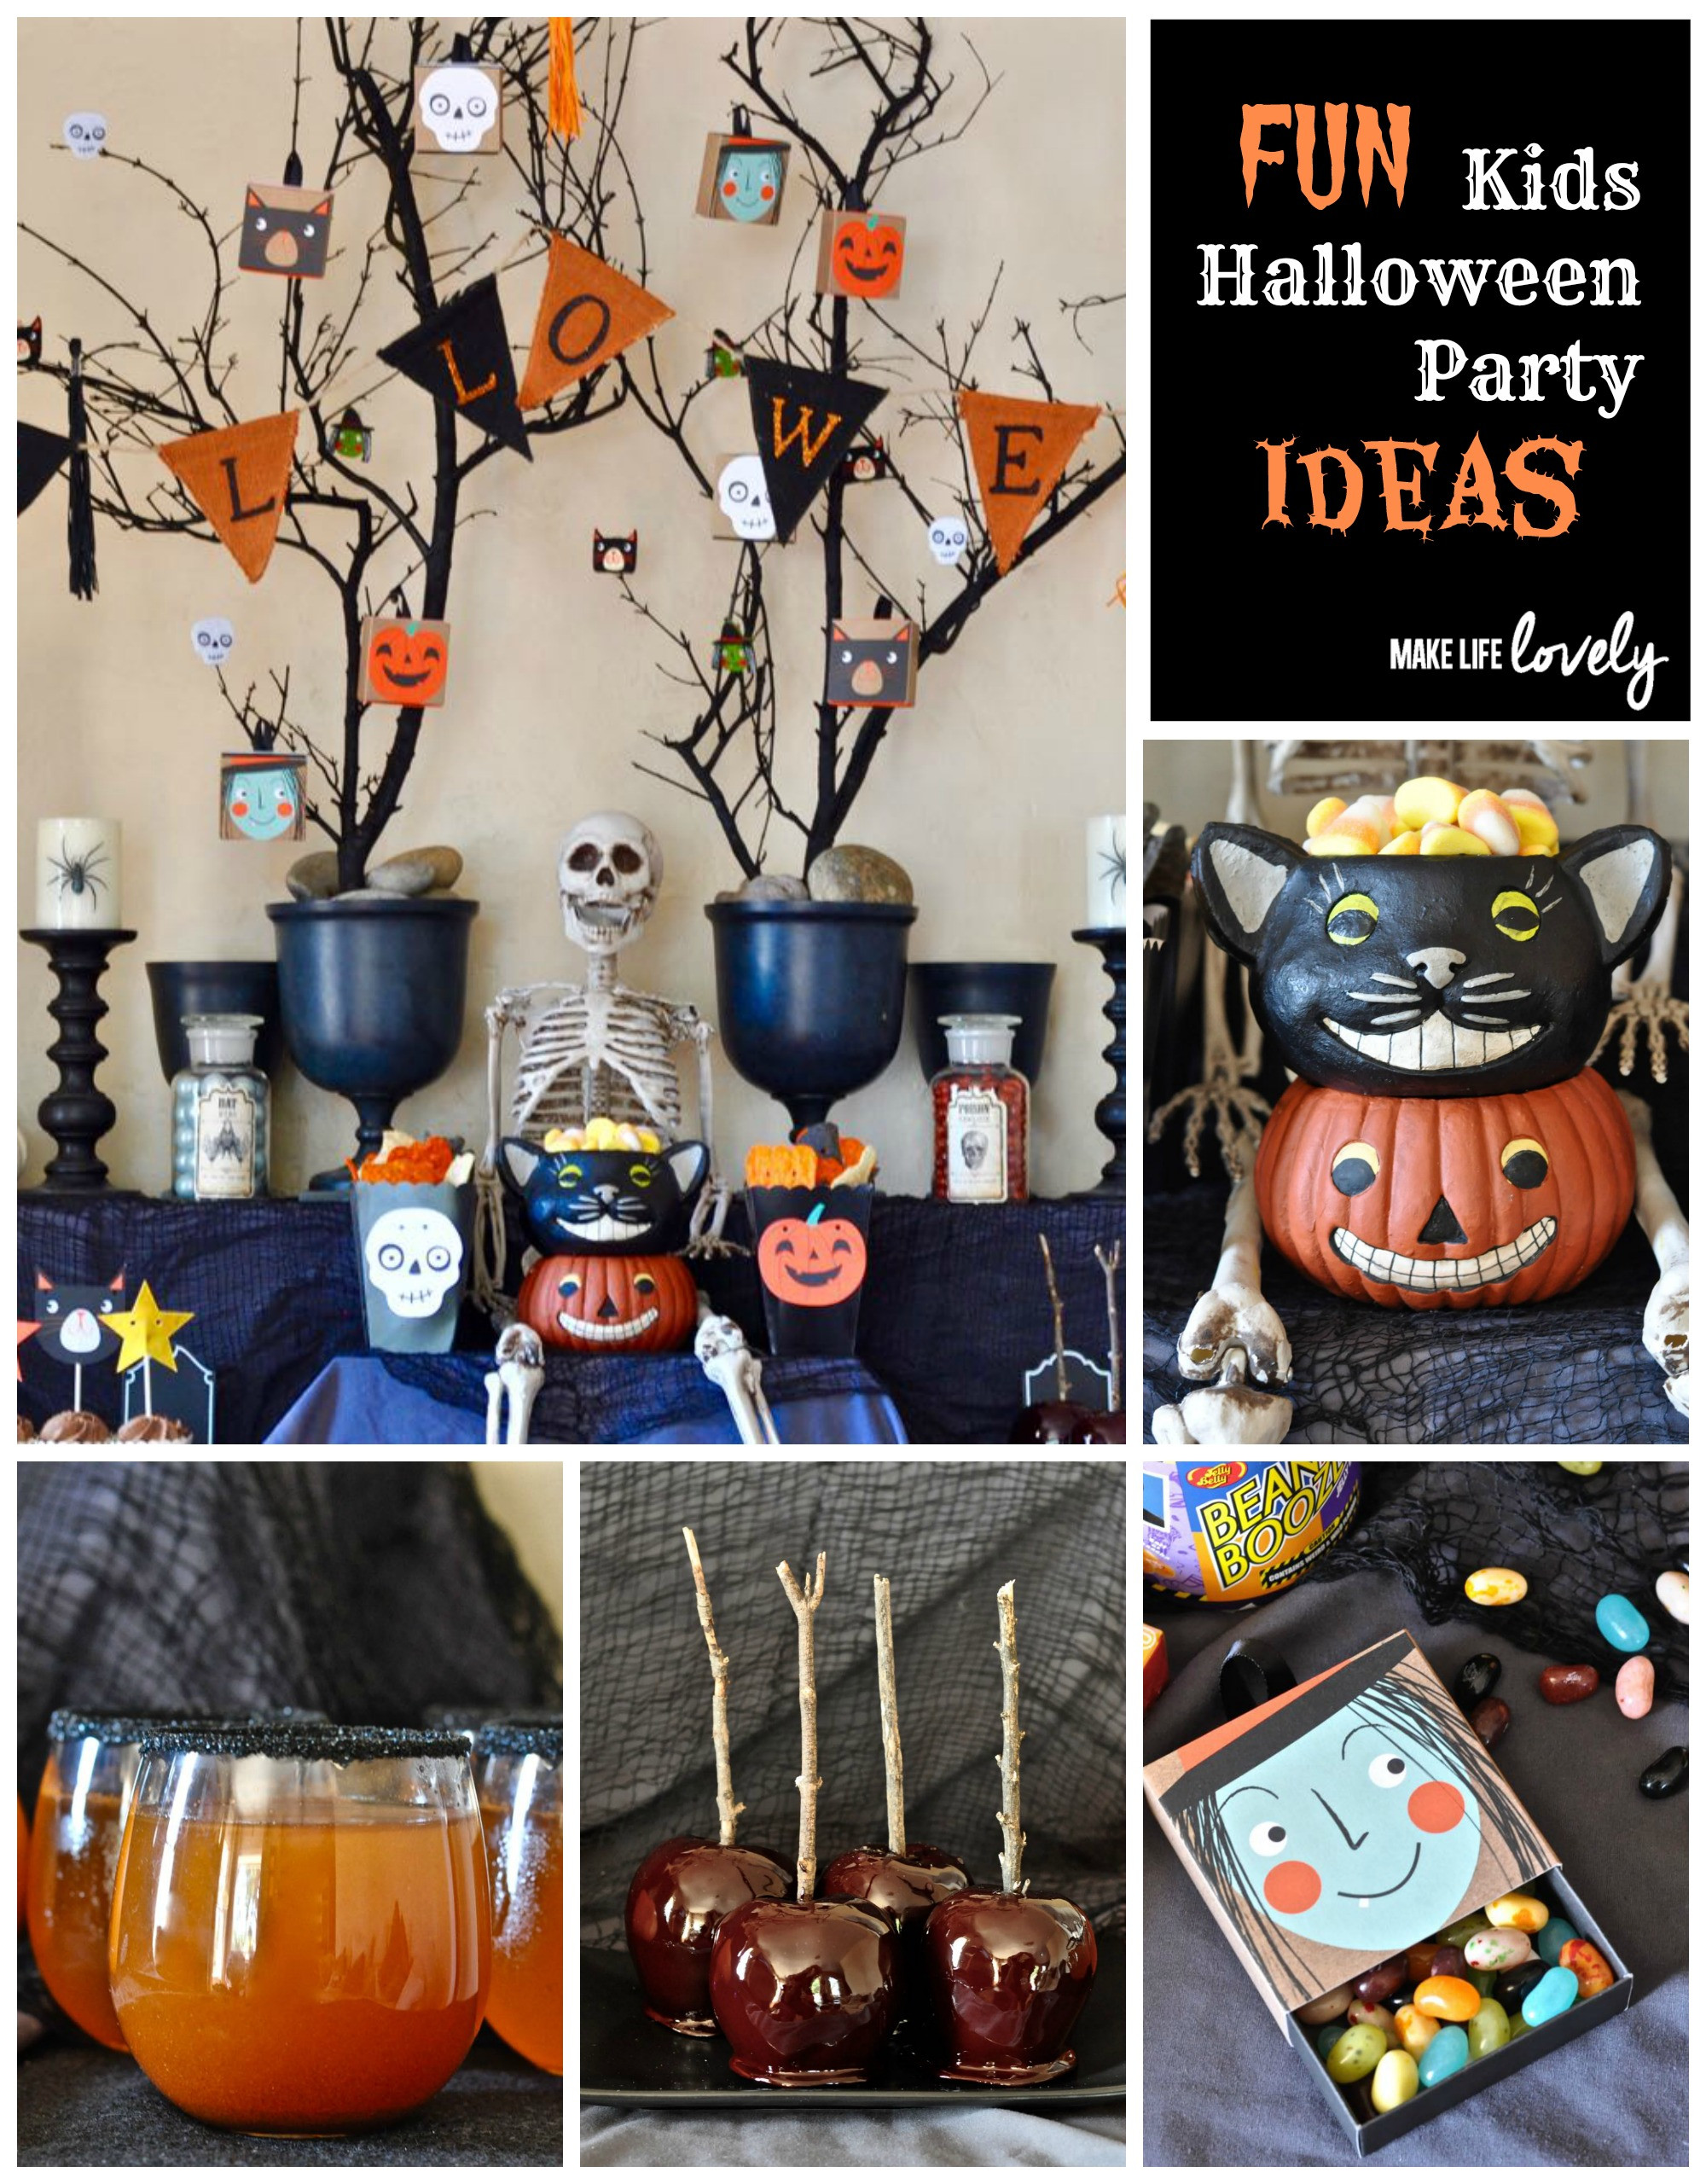 Kids Party Ideas For Halloween
 kids Halloween party